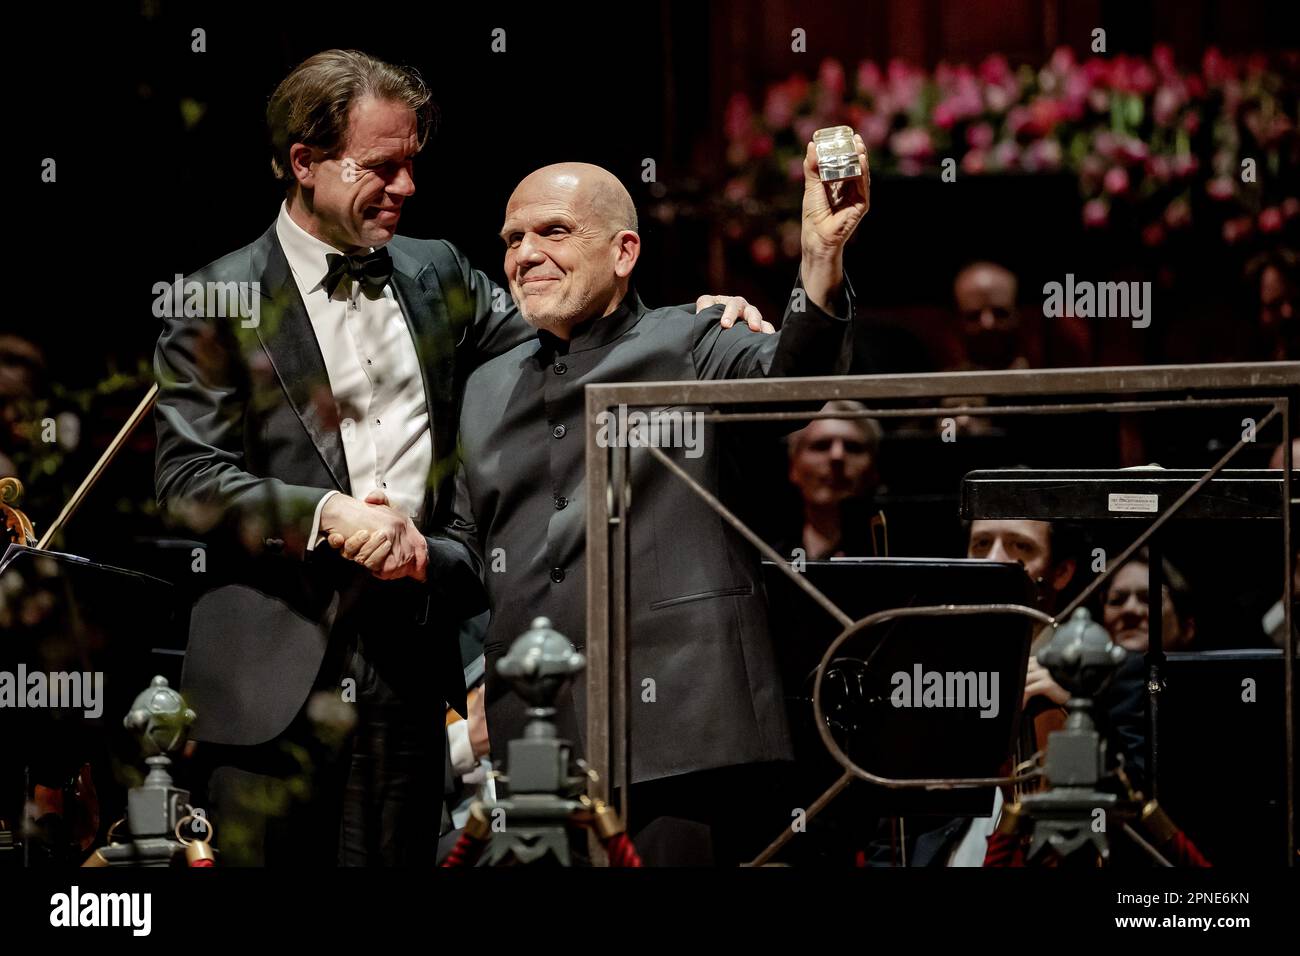 AMSTERDAM - Conductor Jaap van Zweden during the presentation of the Concertgebouw Award for his contribution to the artistic profile of the Concertgebouw. At the age of 19, the 62-year-old Van Zweden became the youngest ever concertmaster of the Concertgebouworkest. ANP ROBIN VAN LONKHUIJSEN netherlands out - belgium out Stock Photo